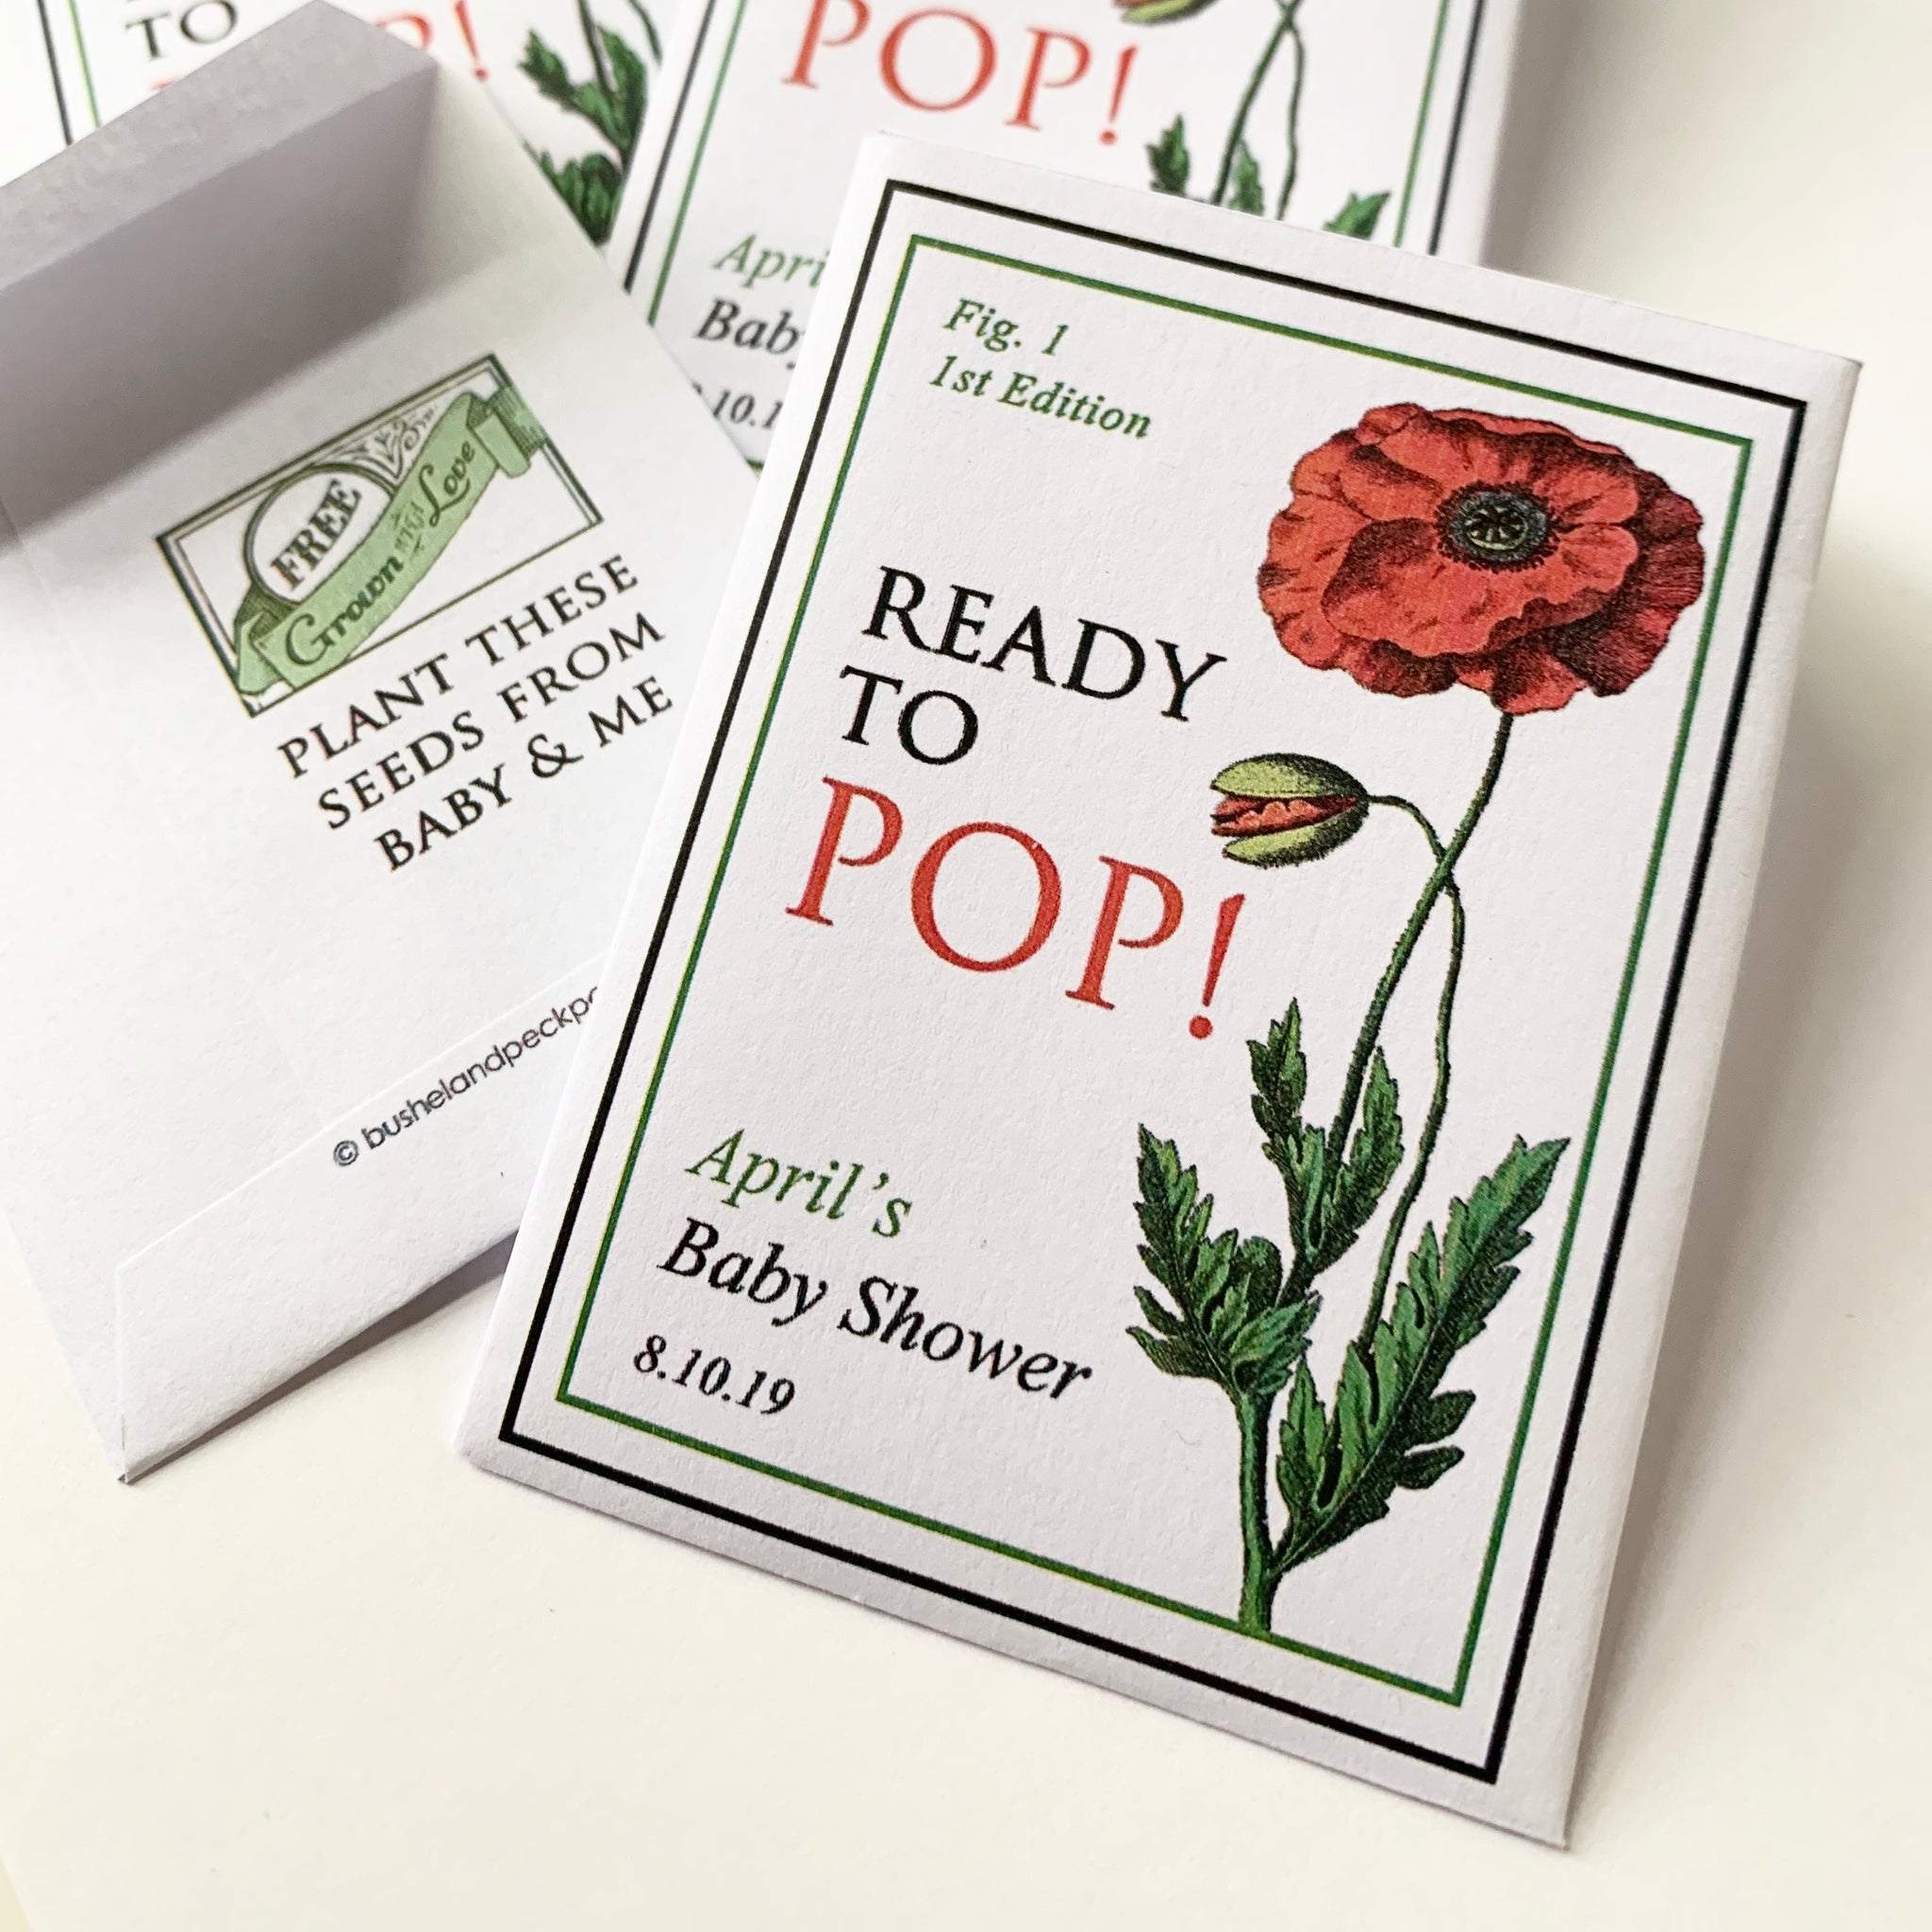 Baby Shower Seed Packet Favors, Baby Shower Favors, Baby in Bloom